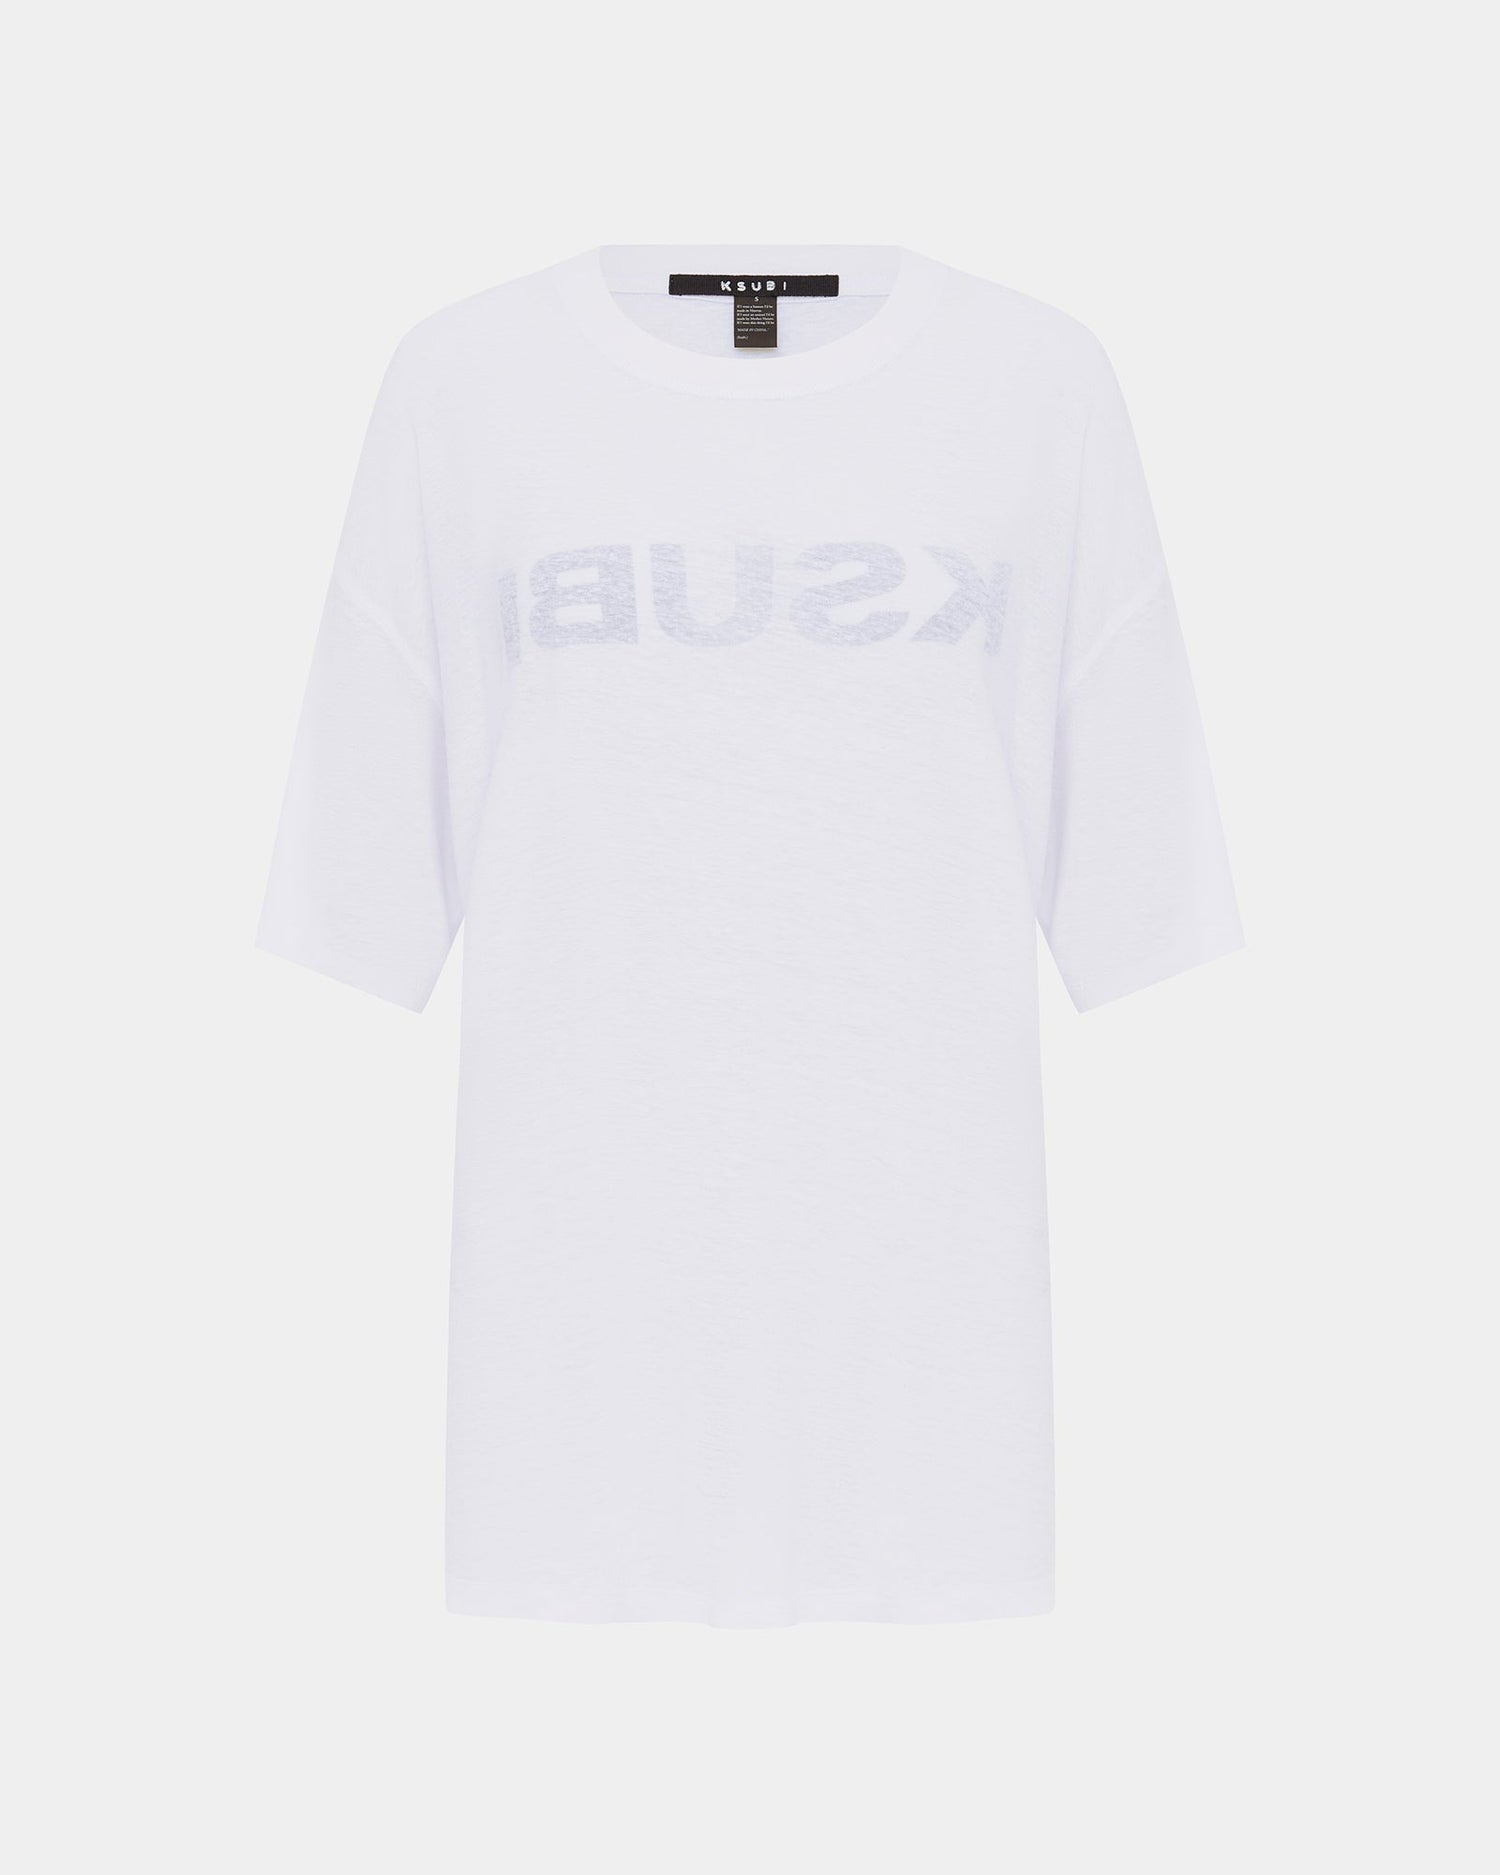 REVERSE IT OH G SS TEE WHITE